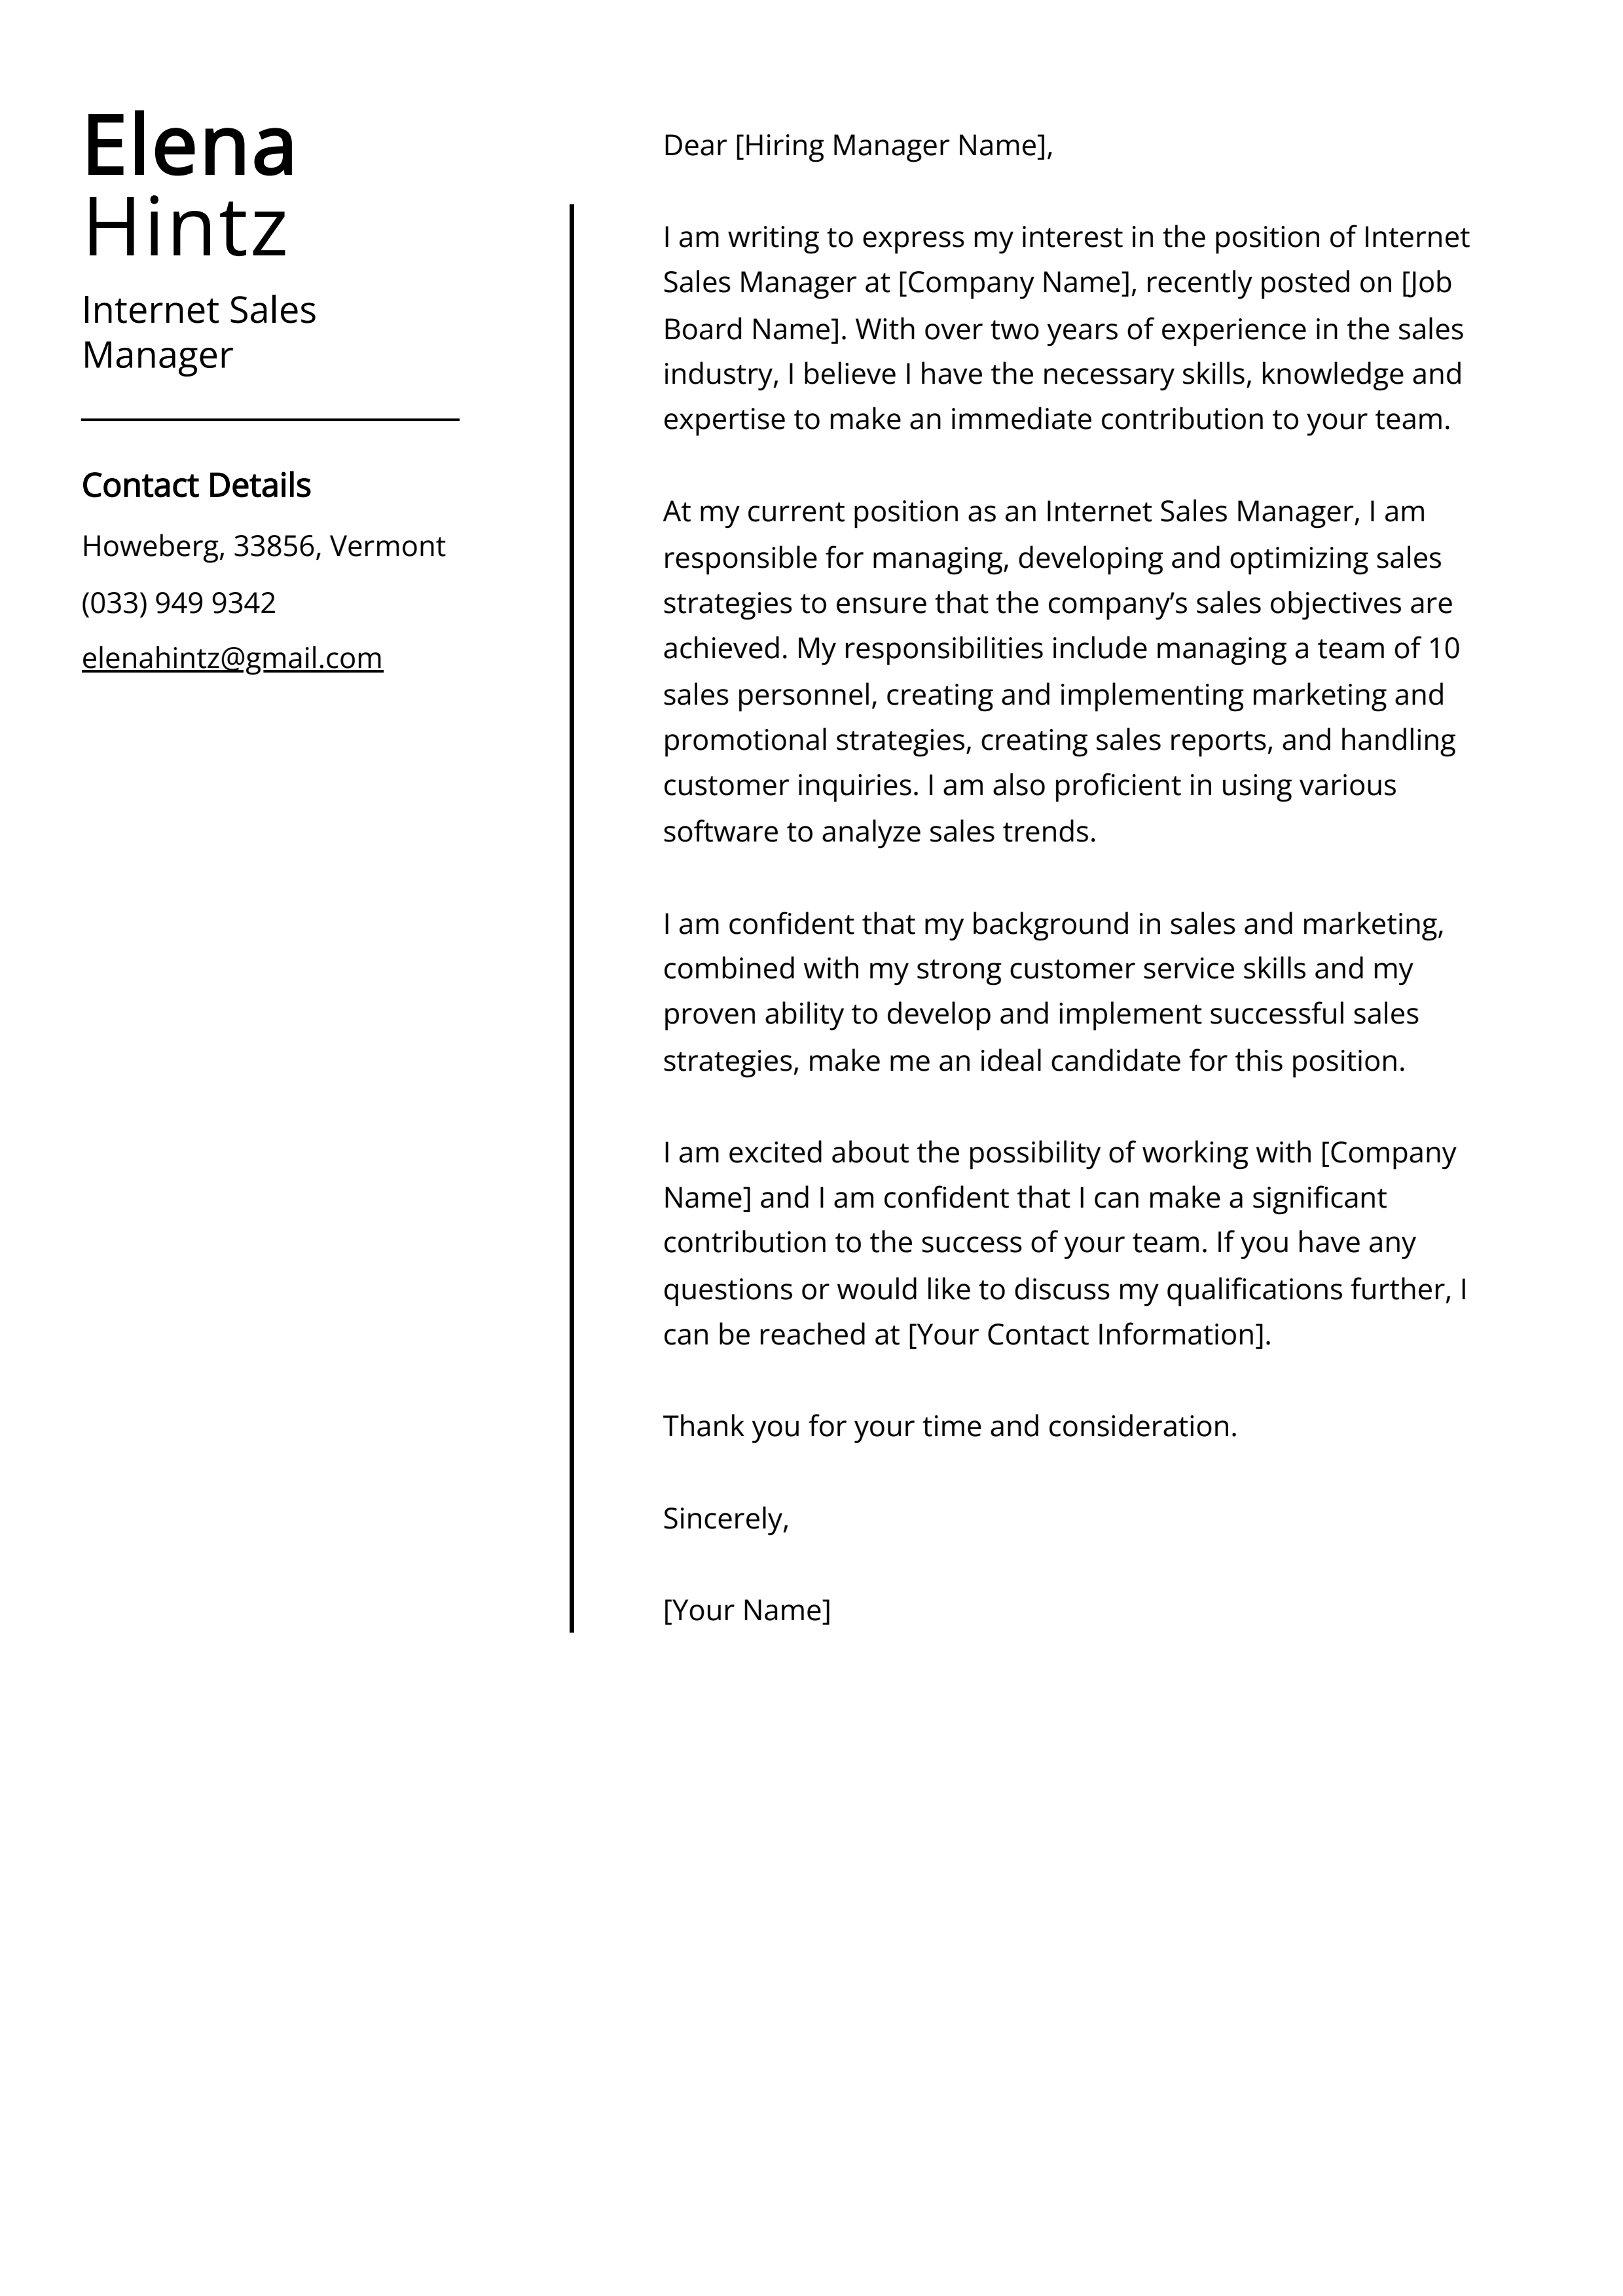 Internet Sales Manager Cover Letter Example